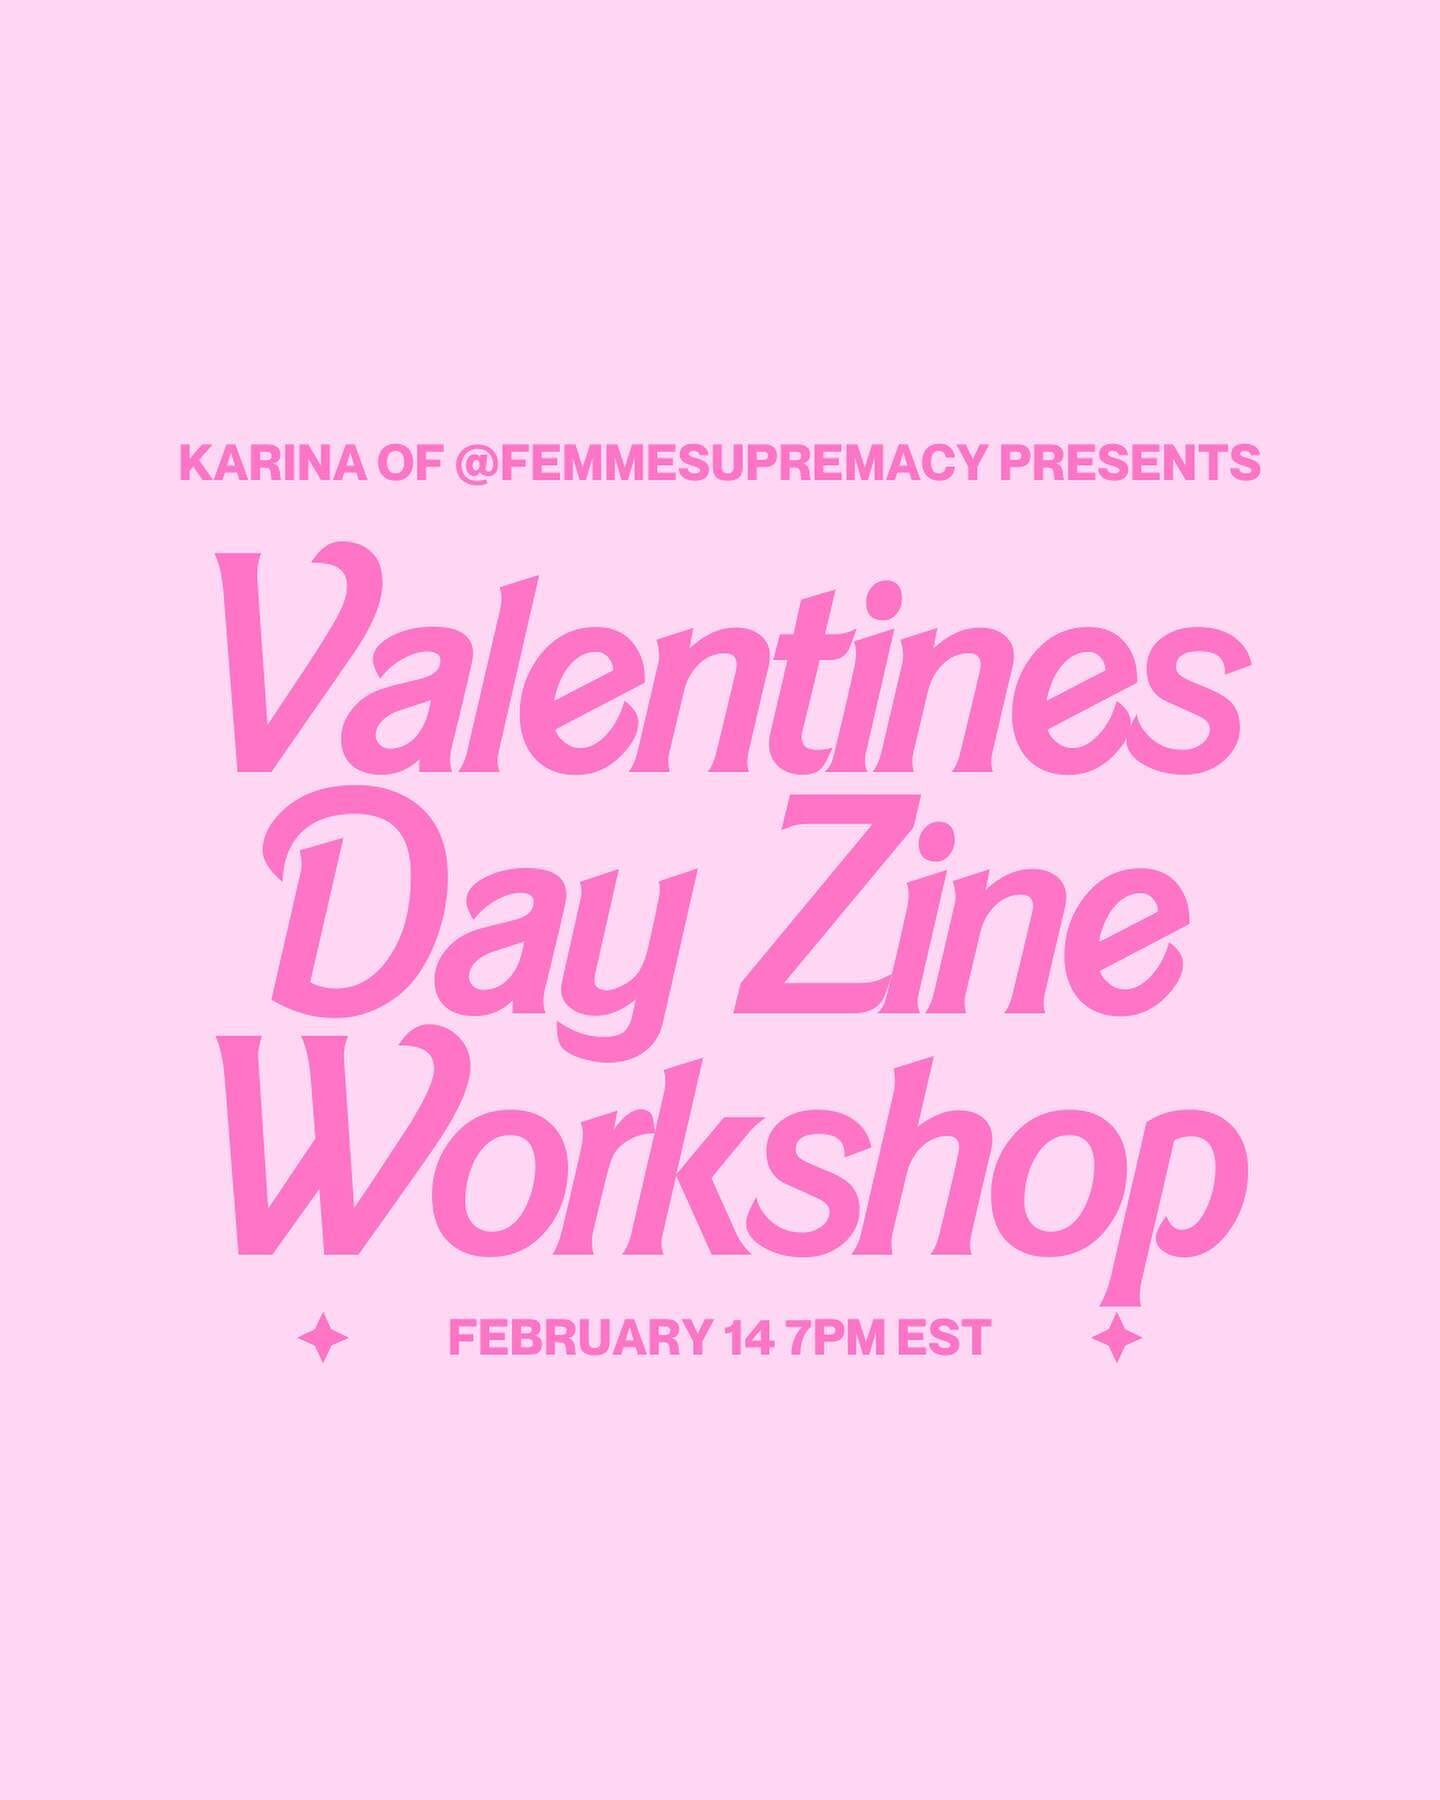 Hi bb 💞 Want to learn how to make your own mini-zine? Join me on Valentine's Day at 7pm EST on Zoom for a zine workshop 🥰 We'll get to hang out &amp; make mini-zines celebrating self-love, healing, inner child/teen work, or whatever you feel called